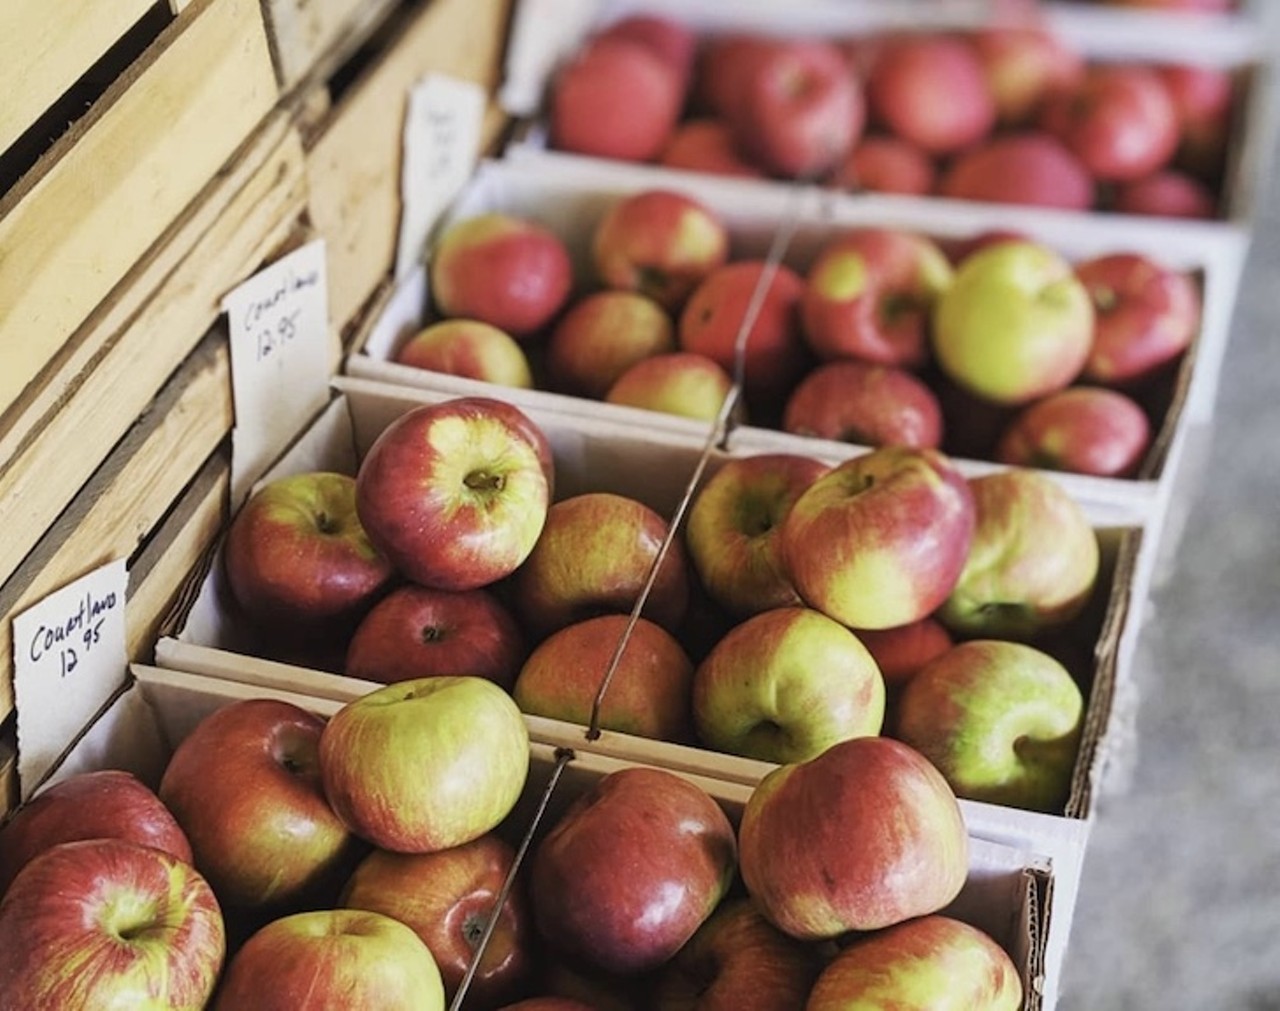 Richardson Farms
6984 Lafayette Rd., Medina
Richardson Farms six-generation, fully-working farm. They are open seven days a week, April through October. Pick your own apples and peaches and feel free to say &#147;hi&#148; to the pigs, cows, chickens, and turkeys. Visit the website for hours and directions. 
Photo via acupcakeaday/Instagram